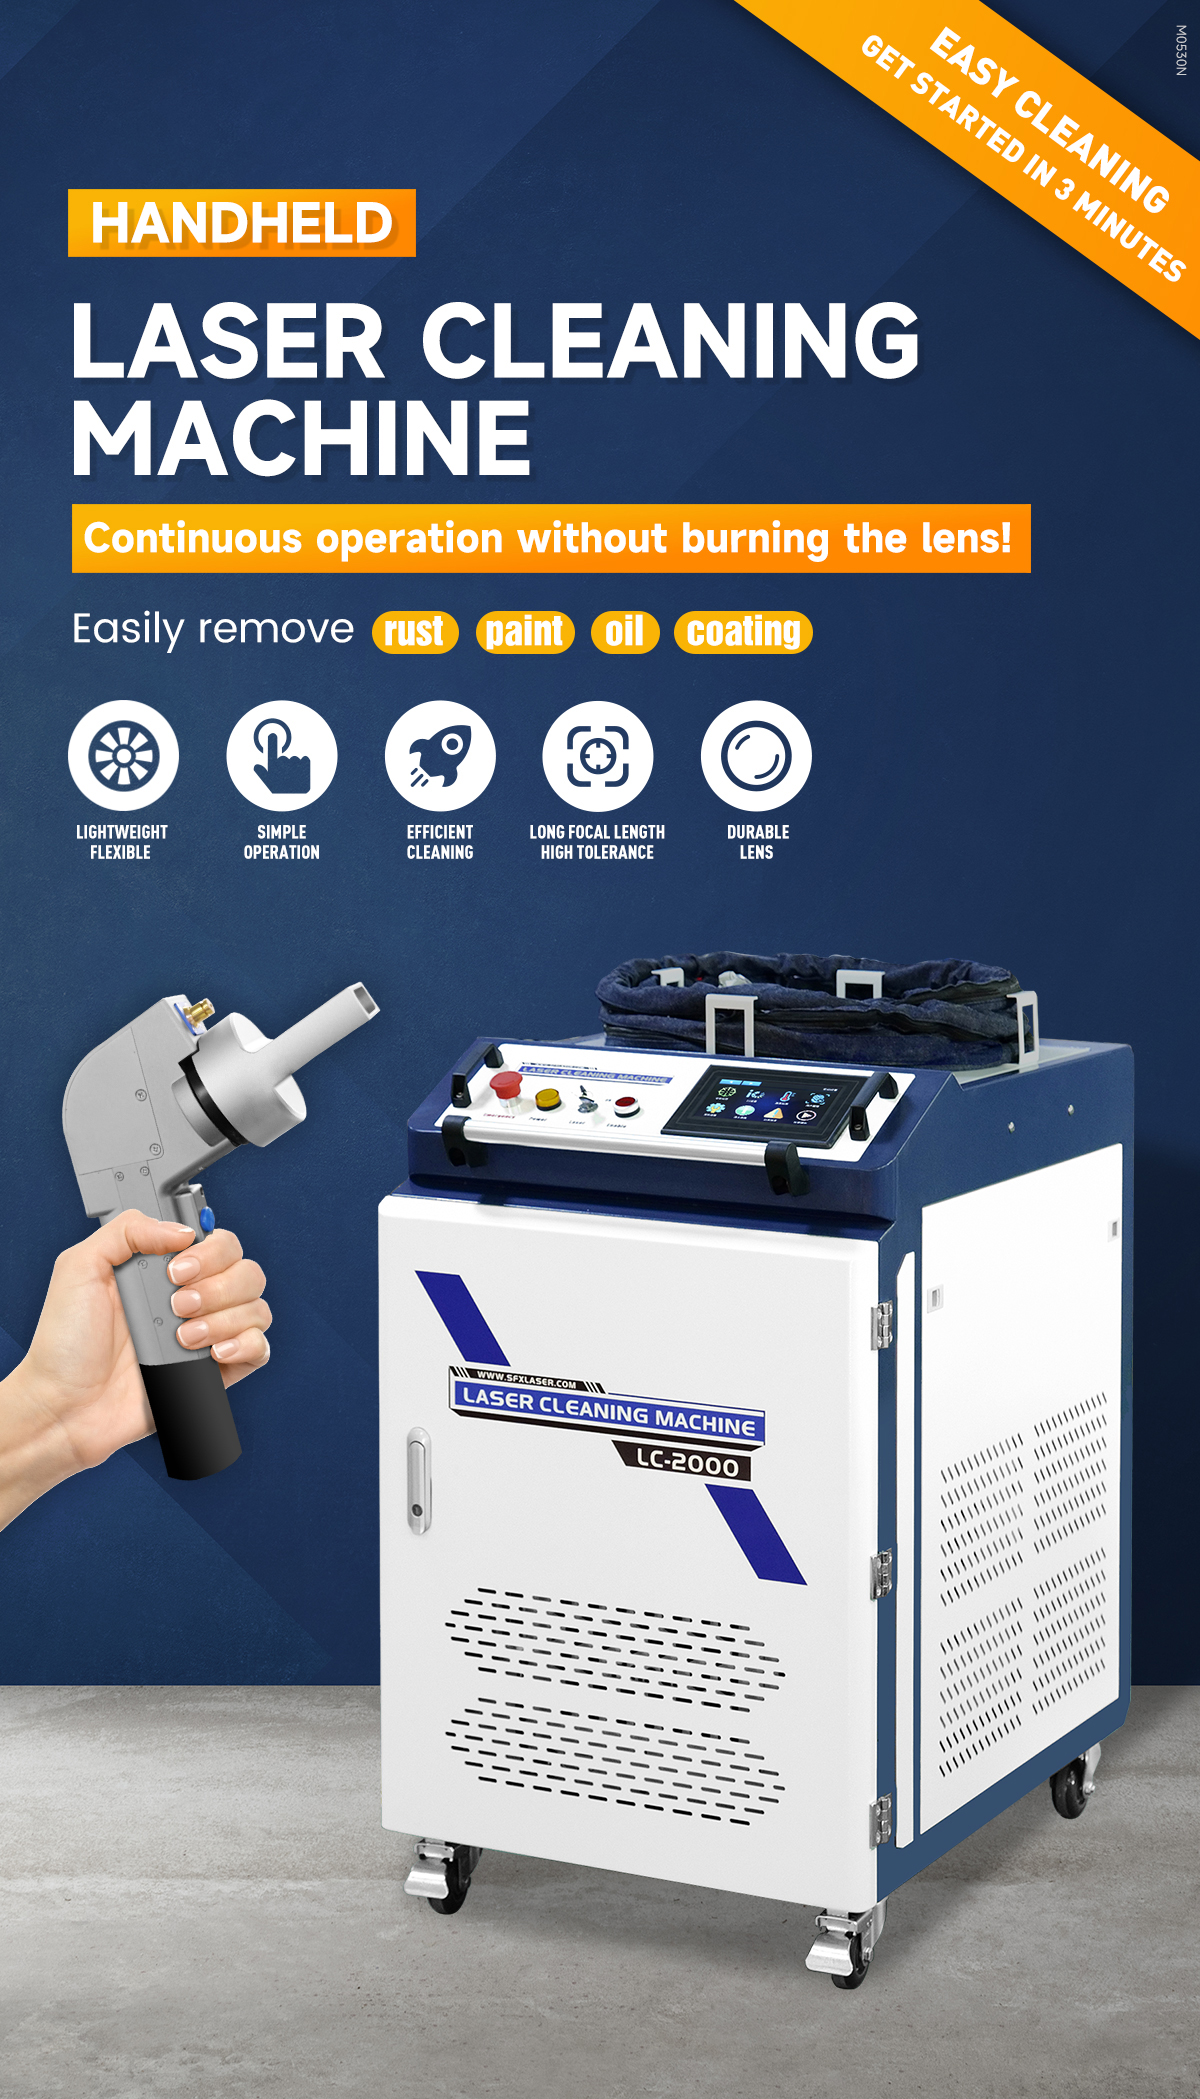 JPT 1500w Laser Cleaning Machine Laser Metal Rust Removal Laser Painting Remover Machine 220V JPT Laser Cleaner JPT 1500w Laser Cleaning Machine Laser Metal Rust Removal Laser Painting Remover Machine 220V JPT Laser Cleaner sfx laser,sfx JPT laser cleaning machine,1500w laser cleaning machine,Rust Remover Machine,Painting Remover,Laser Rust Removal,rust removal laser